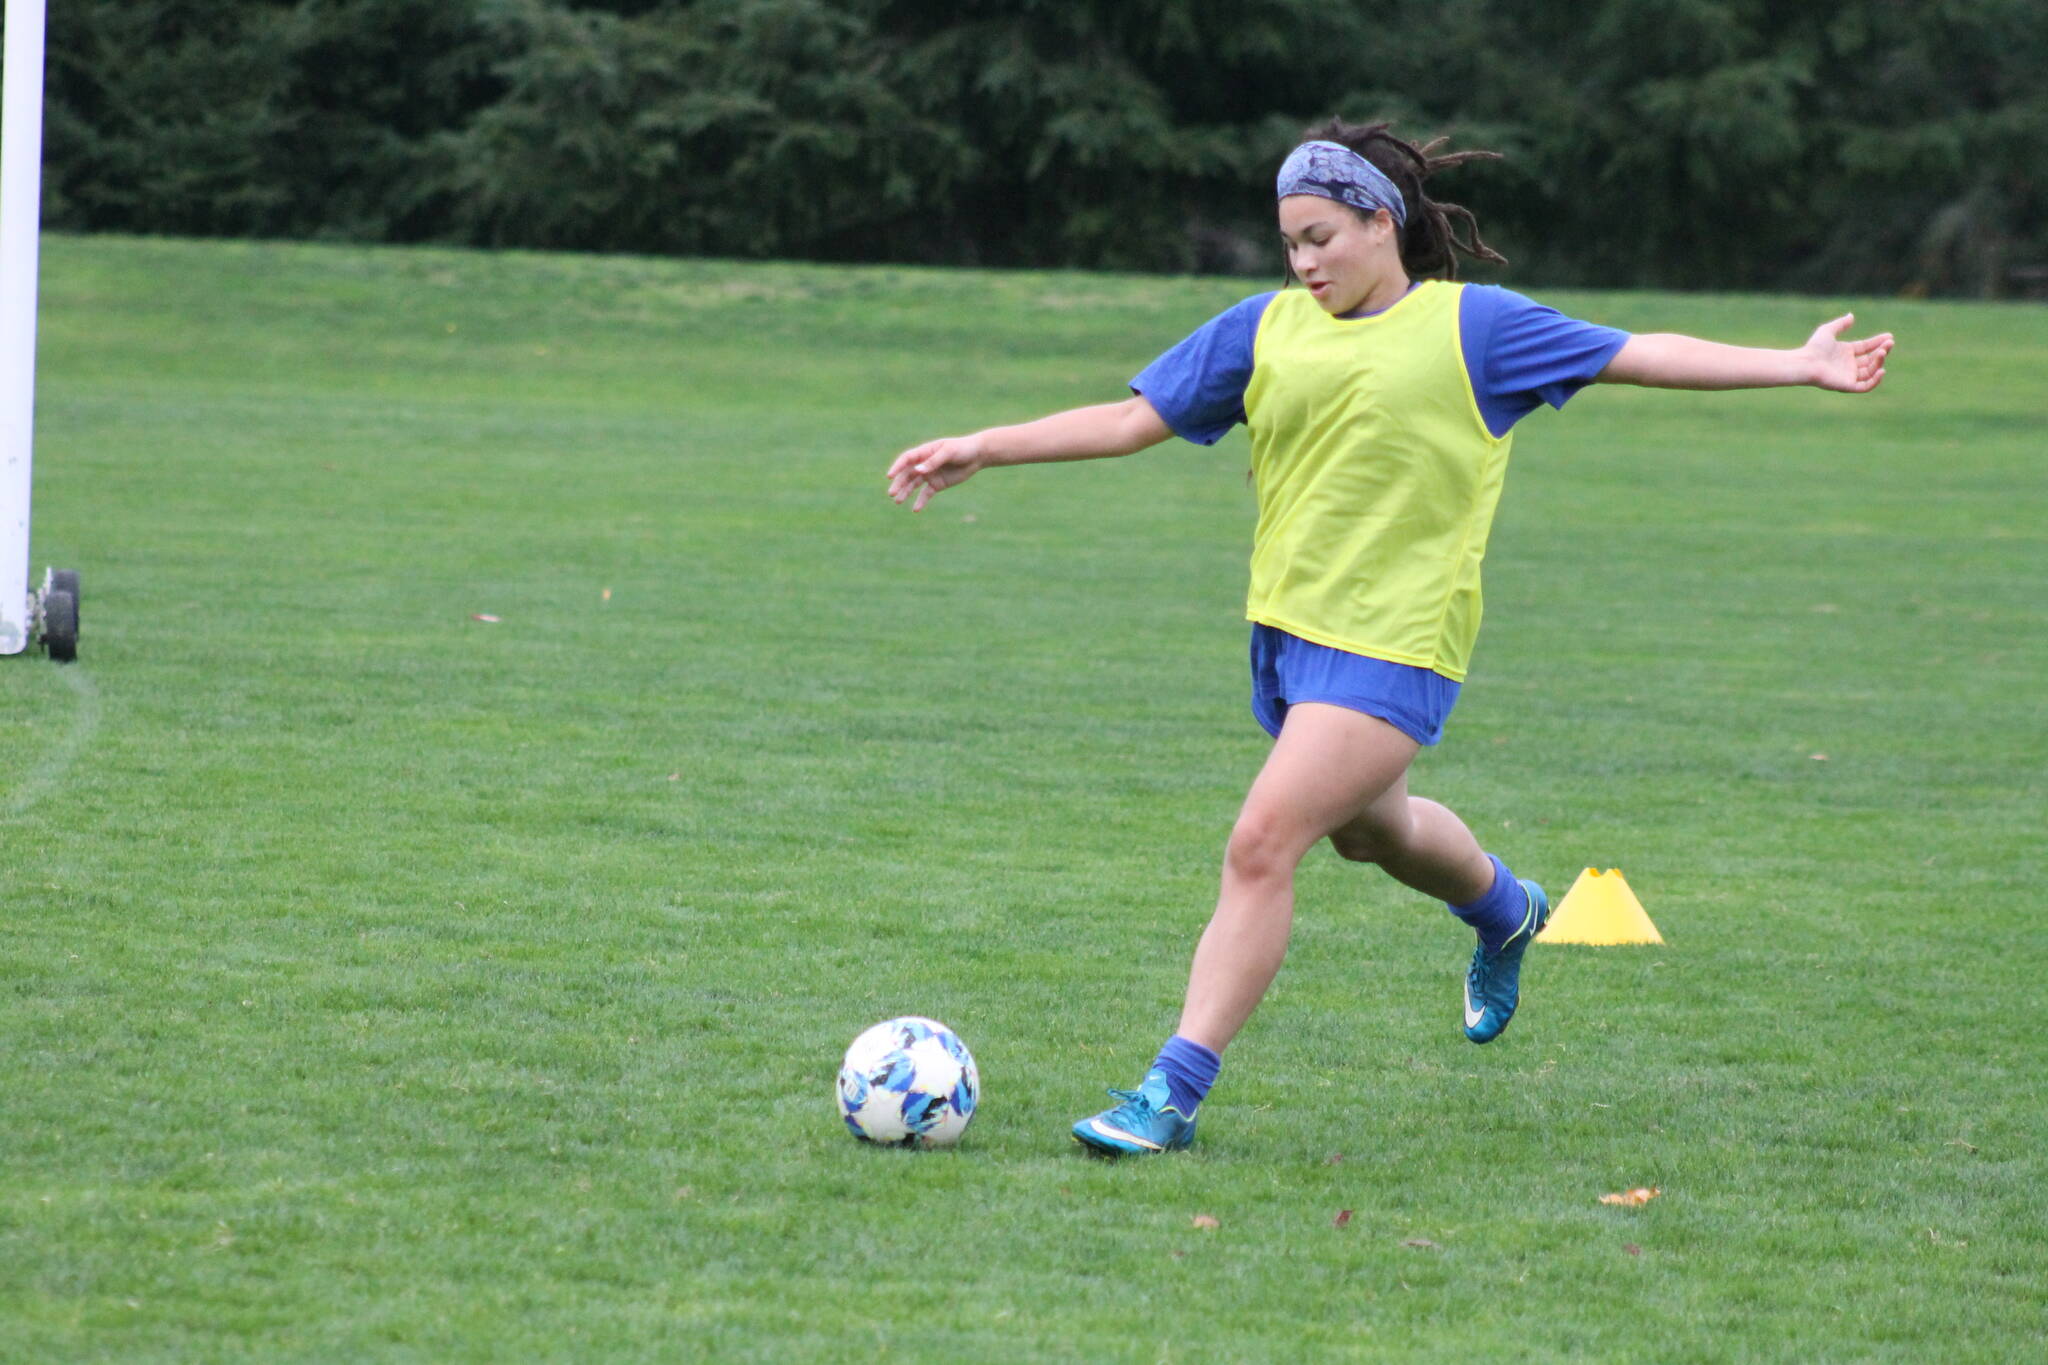 Photo by Kira Erickson/South Whidbey Record
Junior Simone White passes a ball during practice.